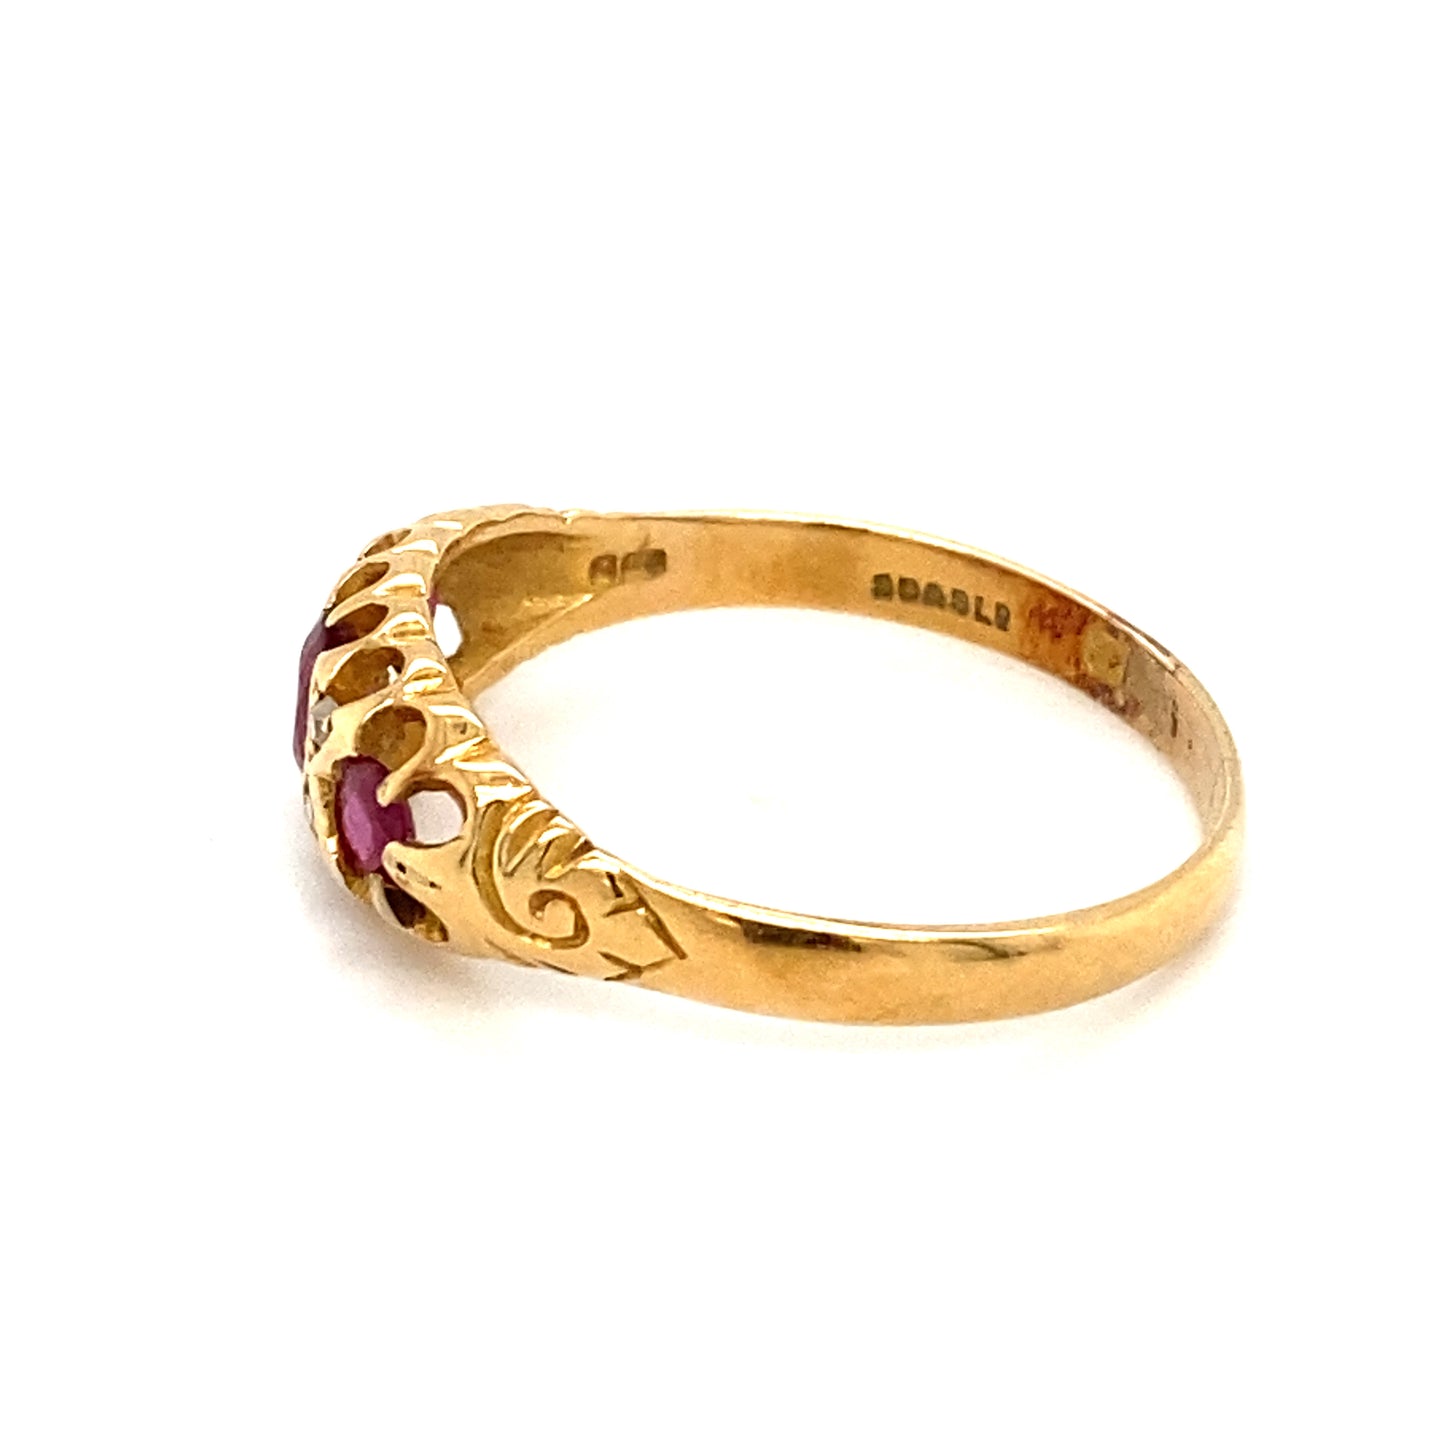 Circa 1910s Edwardian Oval Ruby and Diamond Ring in 14K Gold